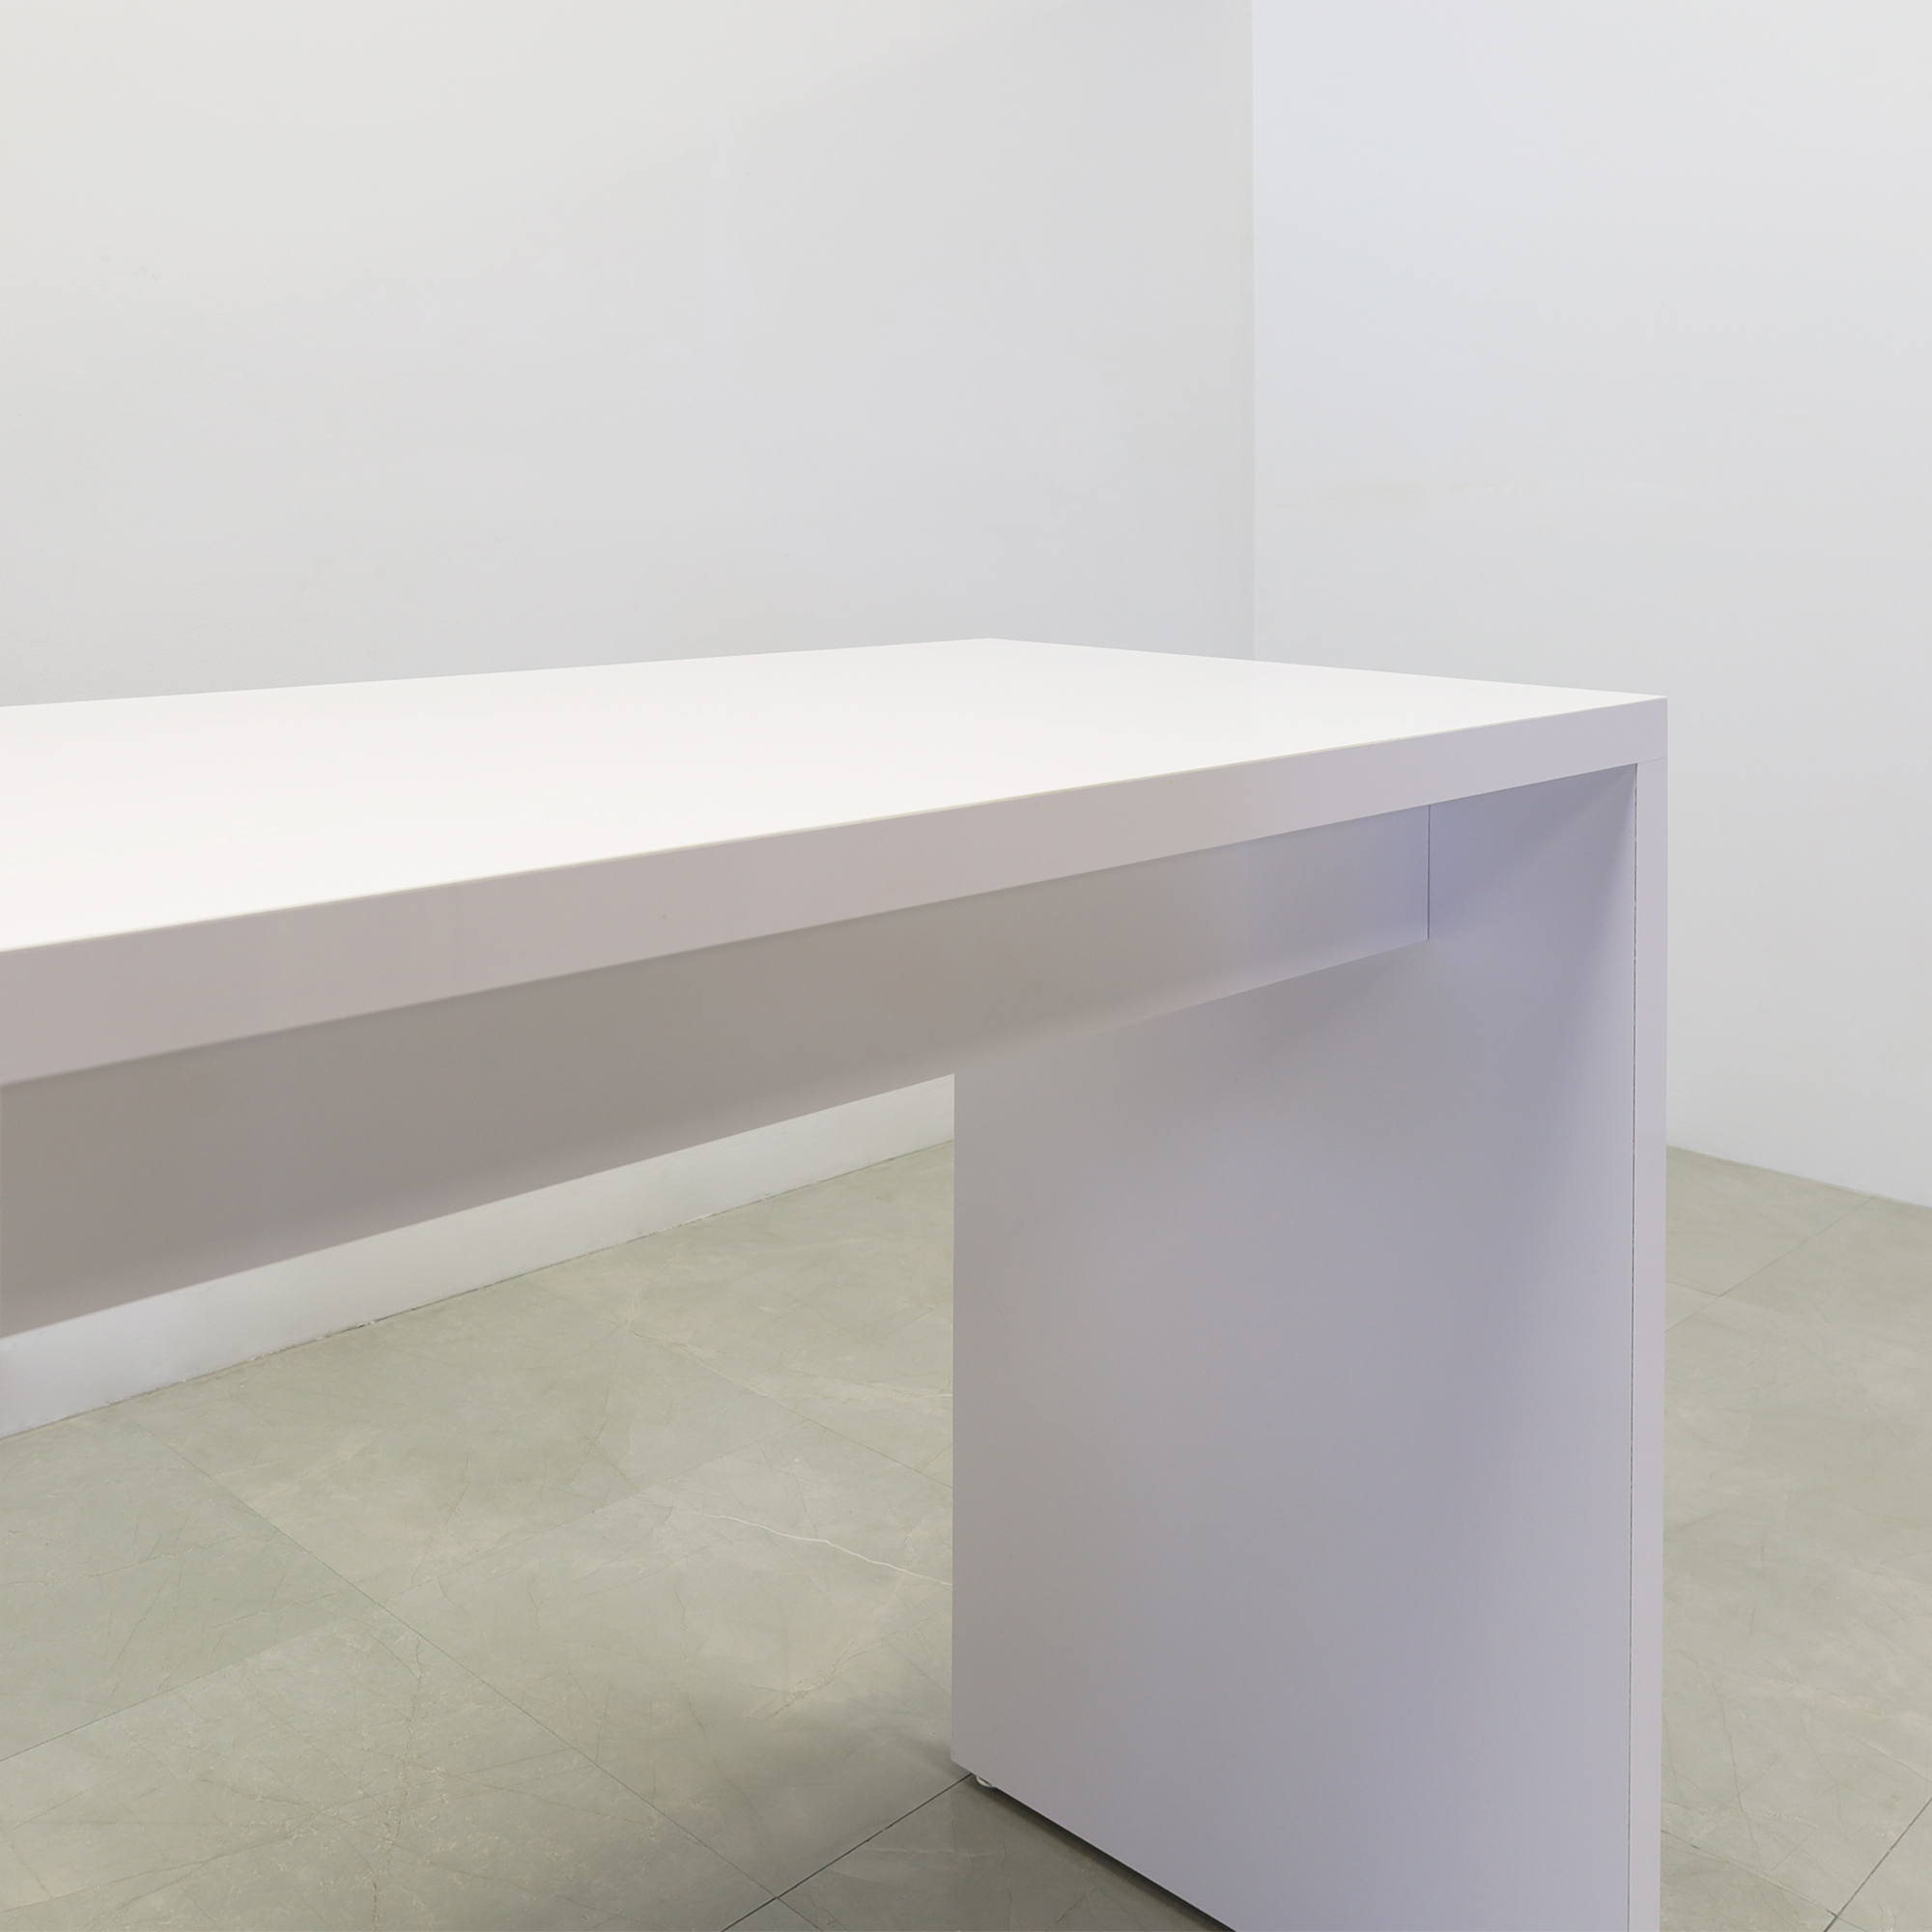 v\46 inches Ashville Bar Table in White Gloss Laminate shown here.